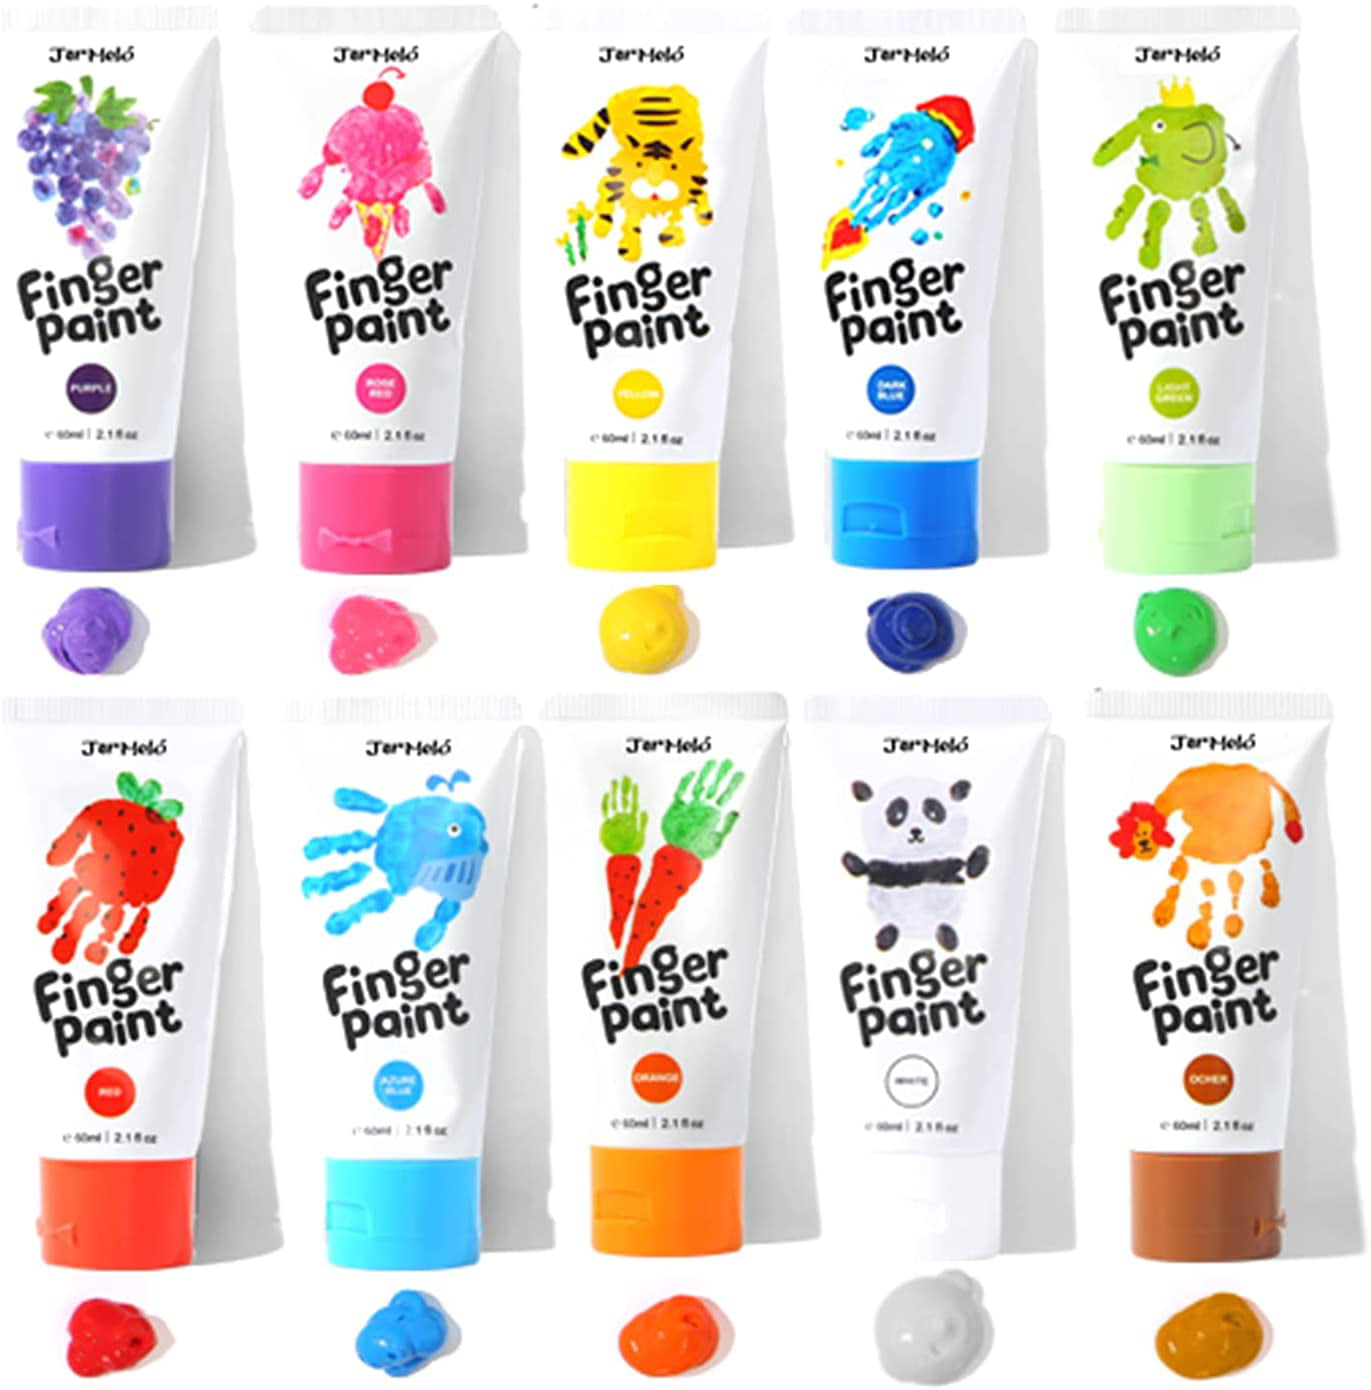  Jar Melo Finger Paint for Toddlers 3+,7 Color Mess Free  Coloring Books for Kids 4-8 Gifts,Non Toxic Fing Painting Kit with Ink Pad  Design for Preschool Learning Education Activities : Toys